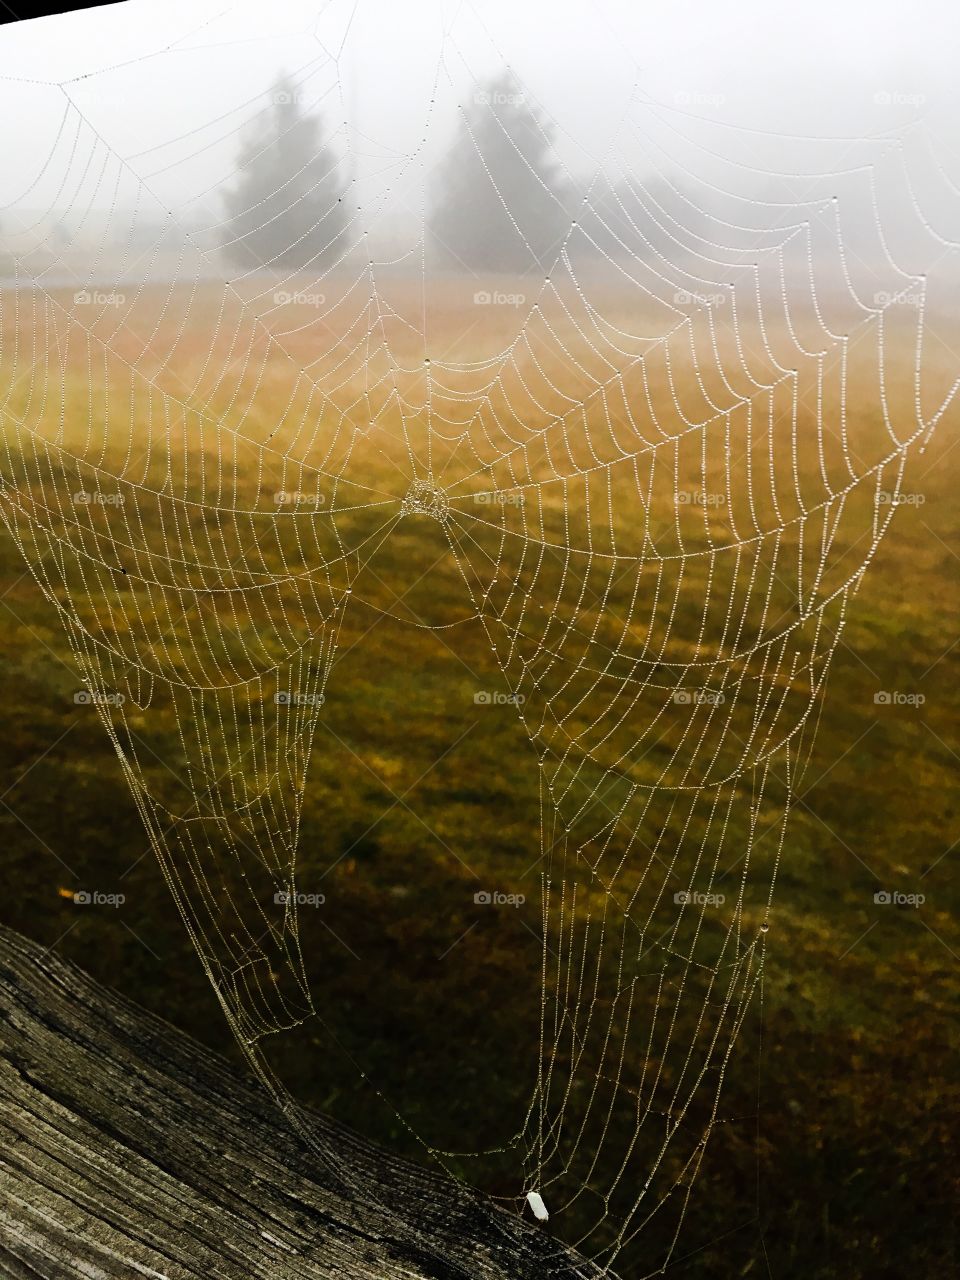 Spider Web with Morning Dew
